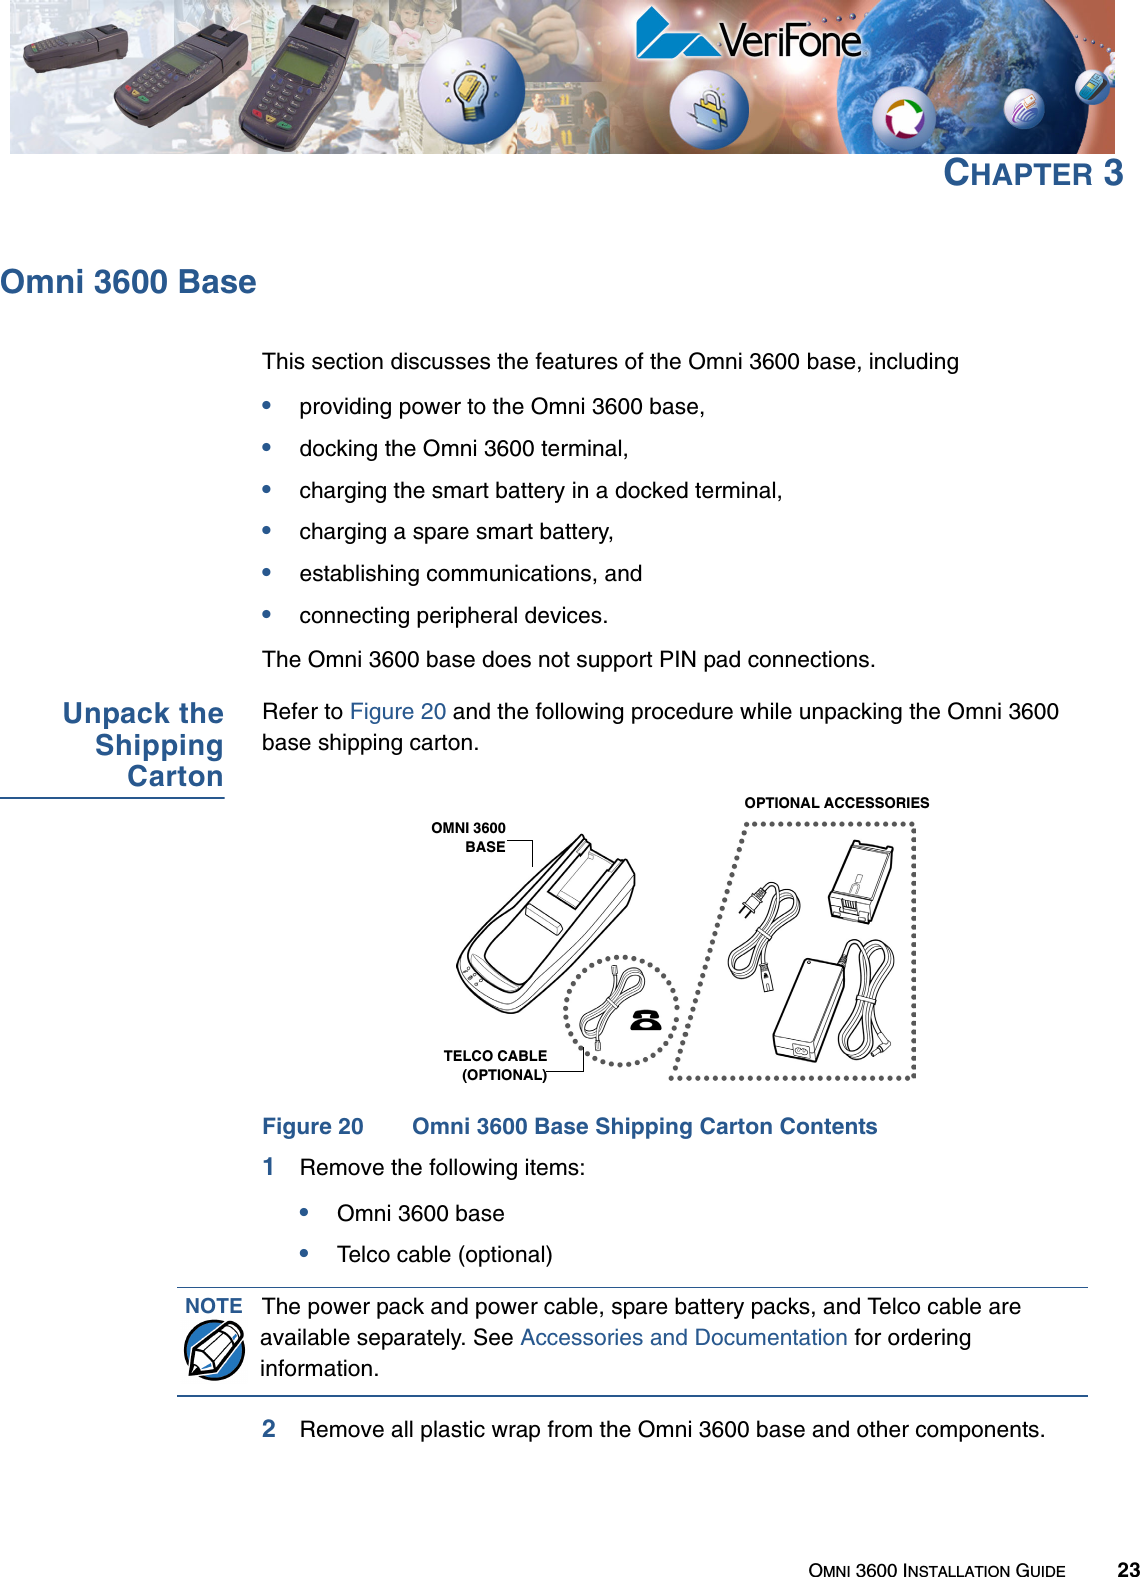 OMNI 3600 INSTALLATION GUIDE 23CHAPTER 3Omni 3600 BaseThis section discusses the features of the Omni 3600 base, including•providing power to the Omni 3600 base,•docking the Omni 3600 terminal,•charging the smart battery in a docked terminal,•charging a spare smart battery,•establishing communications, and•connecting peripheral devices.The Omni 3600 base does not support PIN pad connections.Unpack theShippingCartonRefer to Figure 20 and the following procedure while unpacking the Omni 3600 base shipping carton.Figure 20 Omni 3600 Base Shipping Carton Contents1Remove the following items:•Omni 3600 base•Telco cable (optional)2Remove all plastic wrap from the Omni 3600 base and other components.OMNI 3600BASETELCO CABLE(OPTIONAL)OPTIONAL ACCESSORIESNOTE The power pack and power cable, spare battery packs, and Telco cable are available separately. See Accessories and Documentation for ordering information.